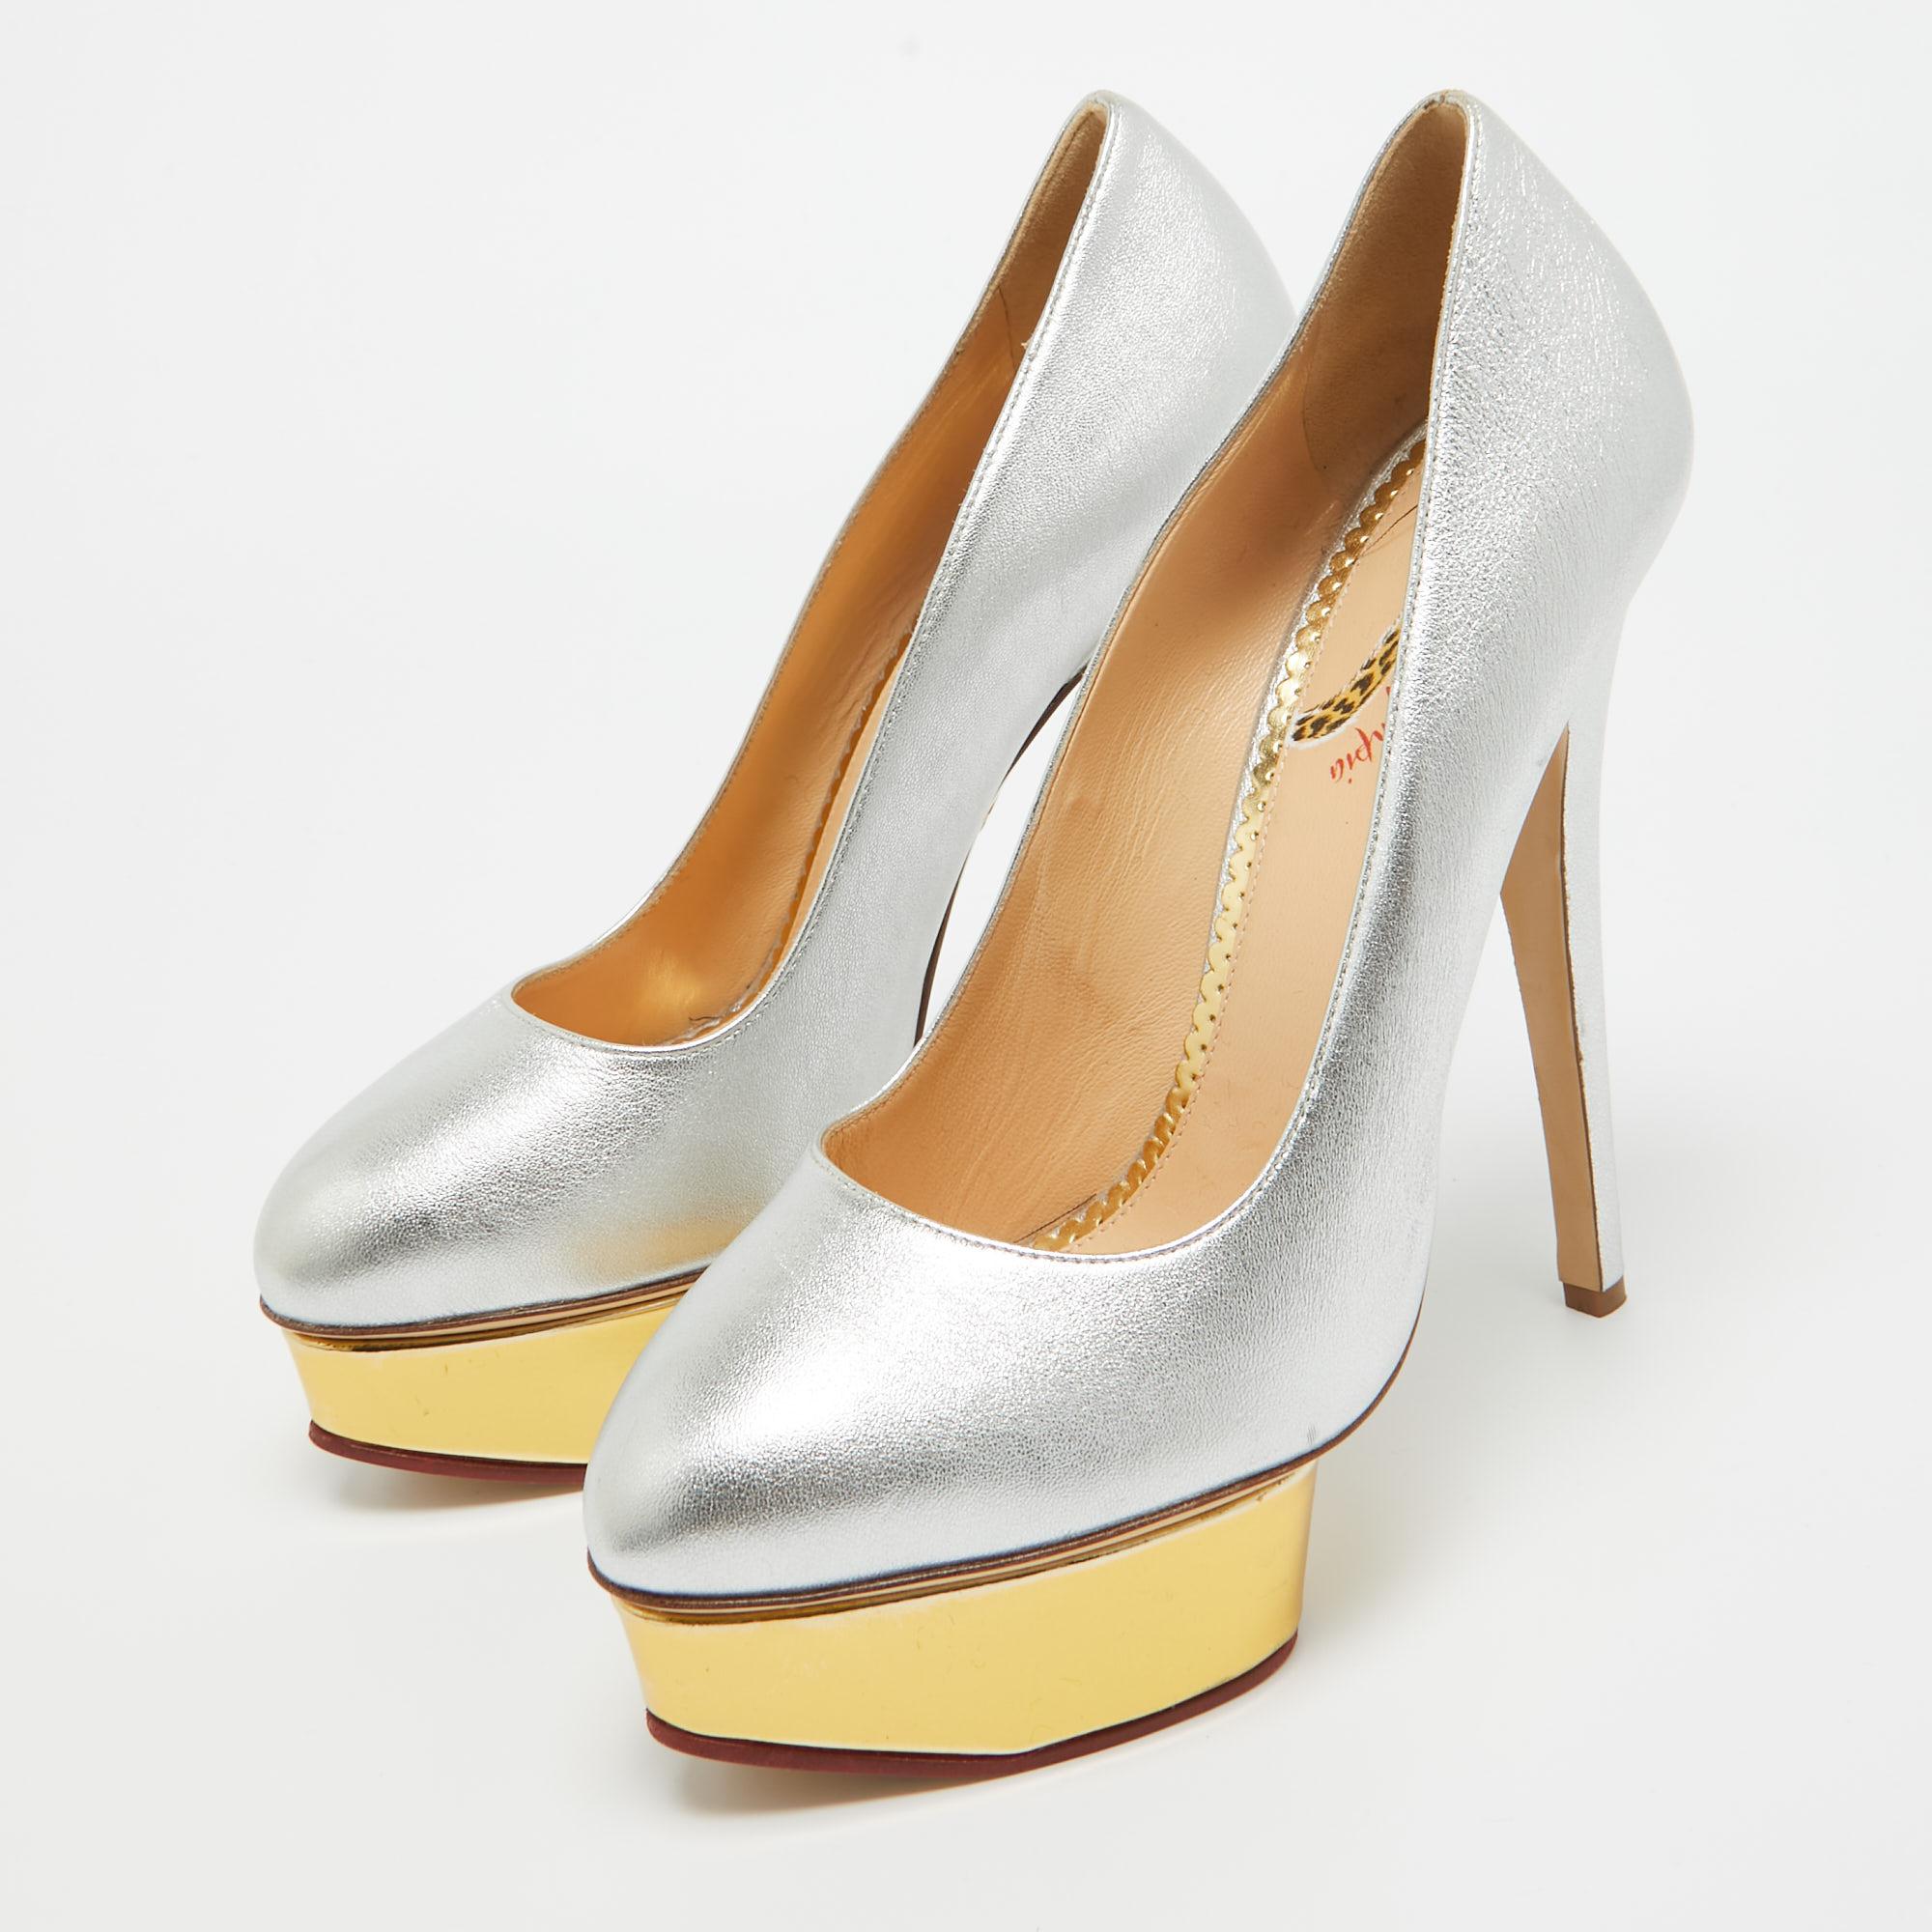 Charlotte Olympia Silver Leather Dolly Platform Pumps Size 40 For Sale 4